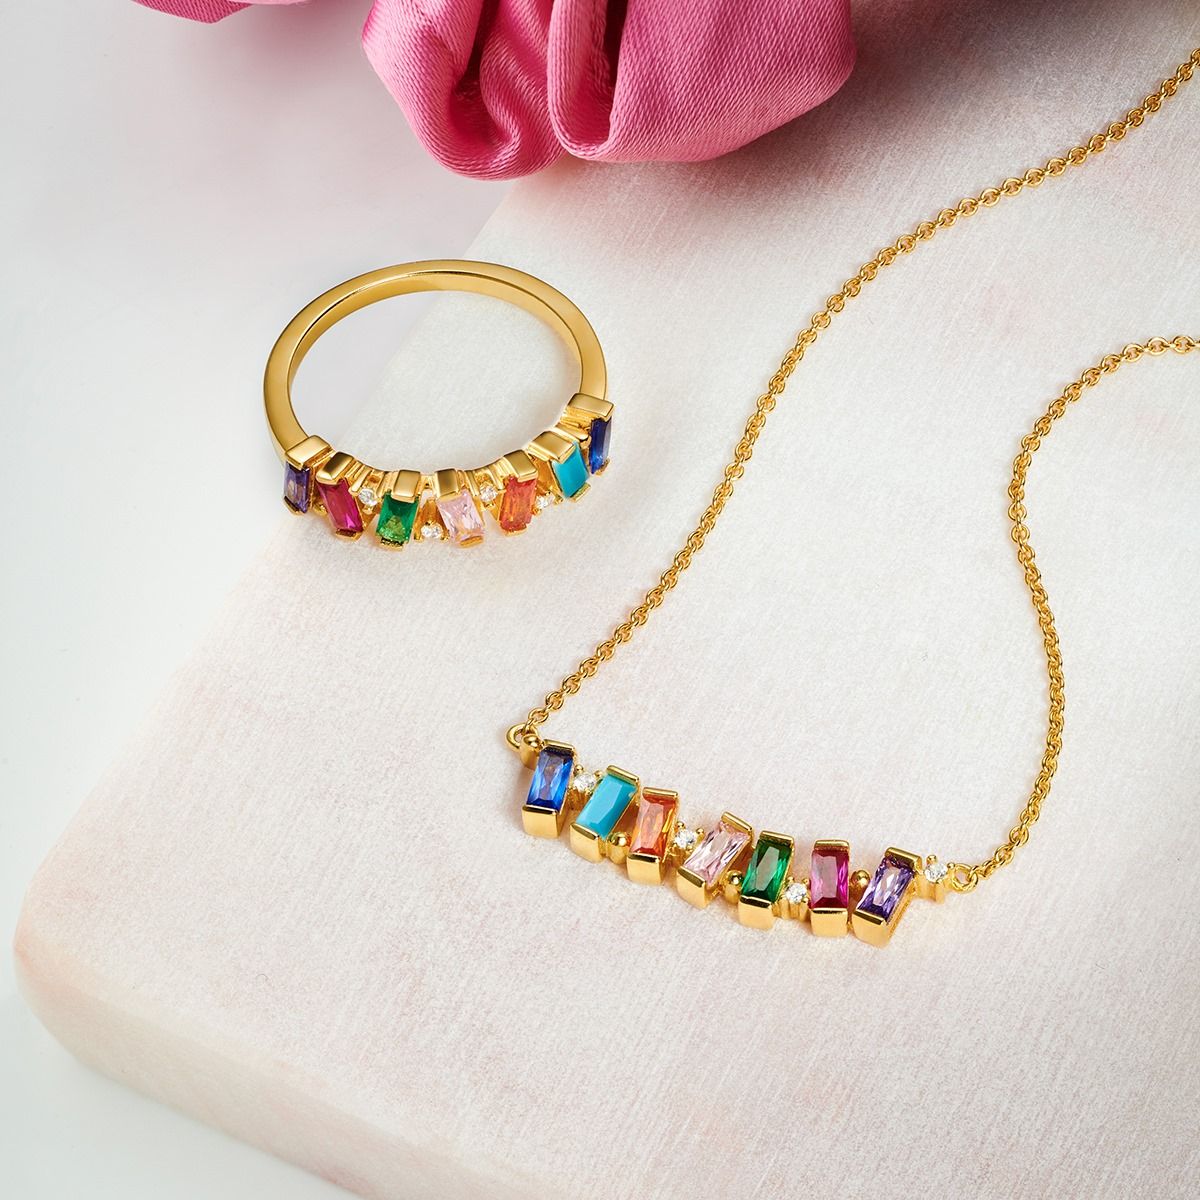 Rainbow colours in Thomas sabo necklace and ring